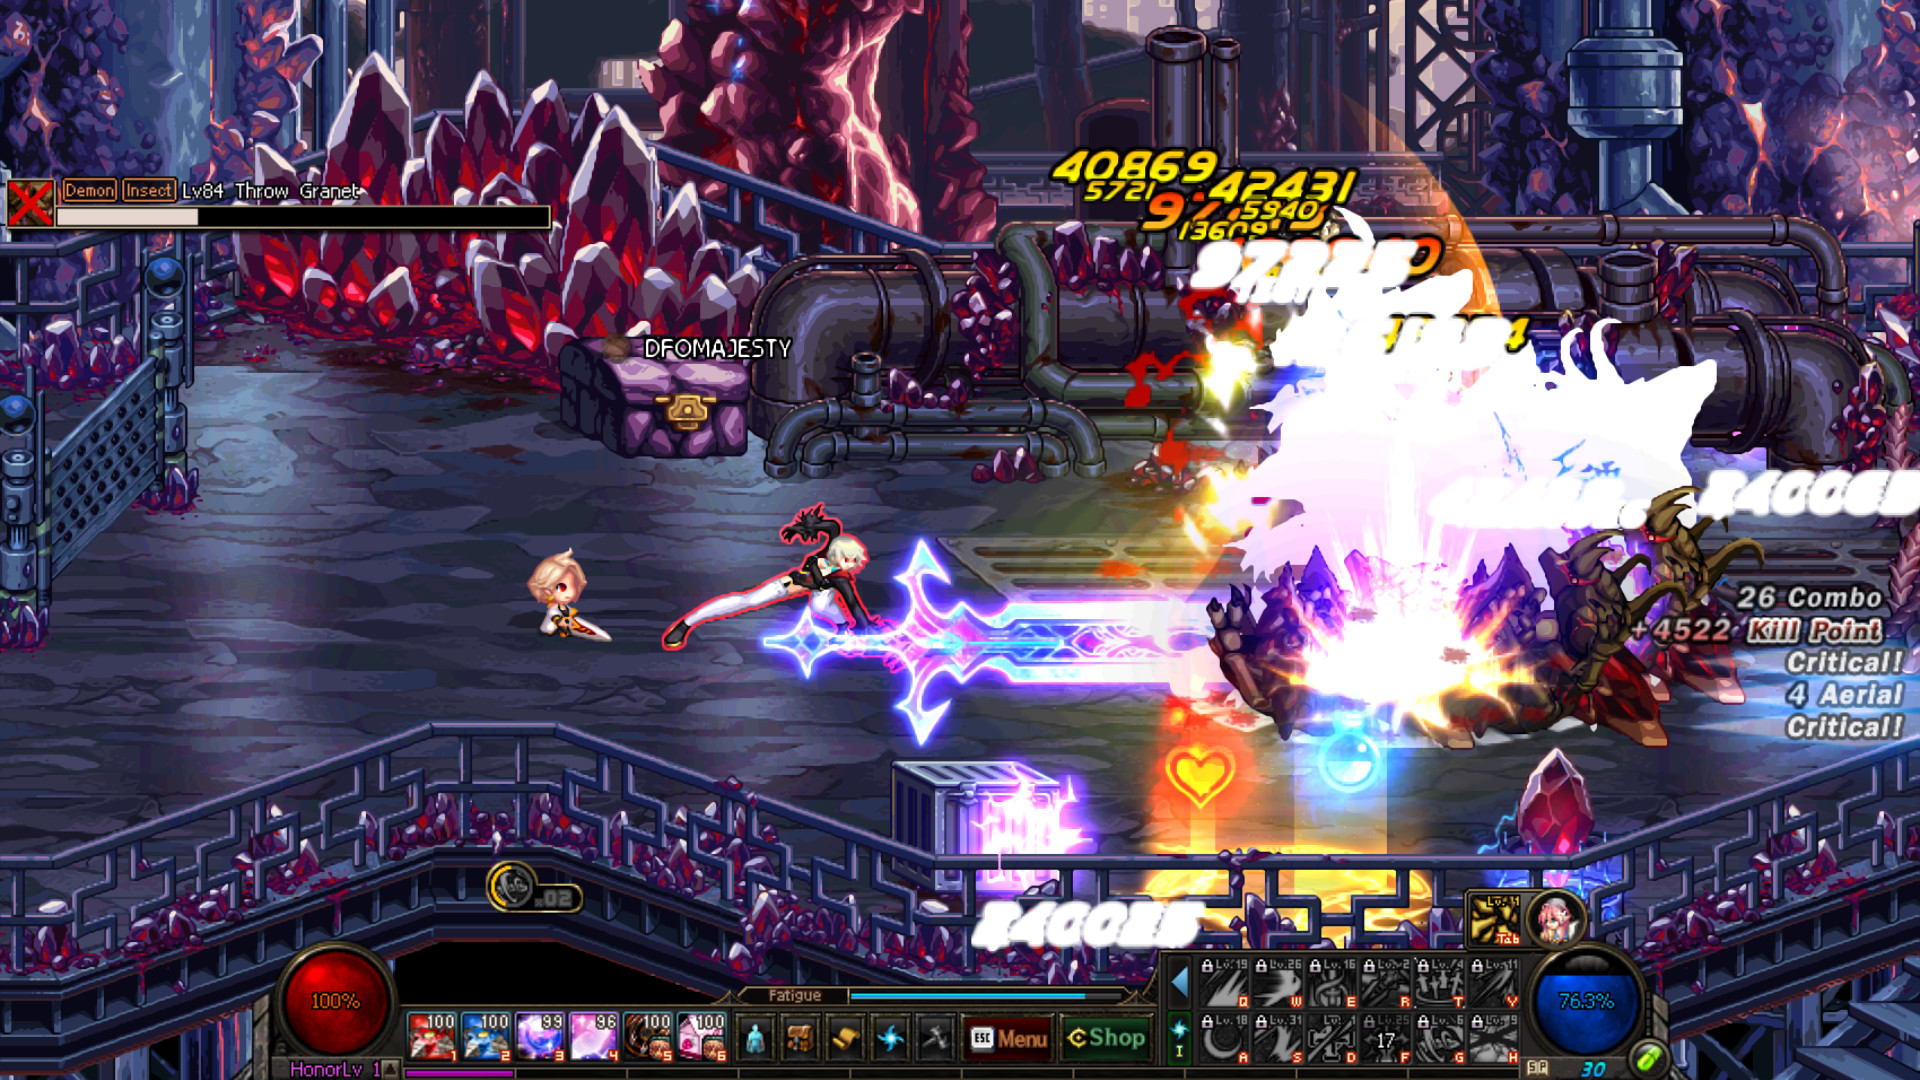 dungeon fighter online steam not launching